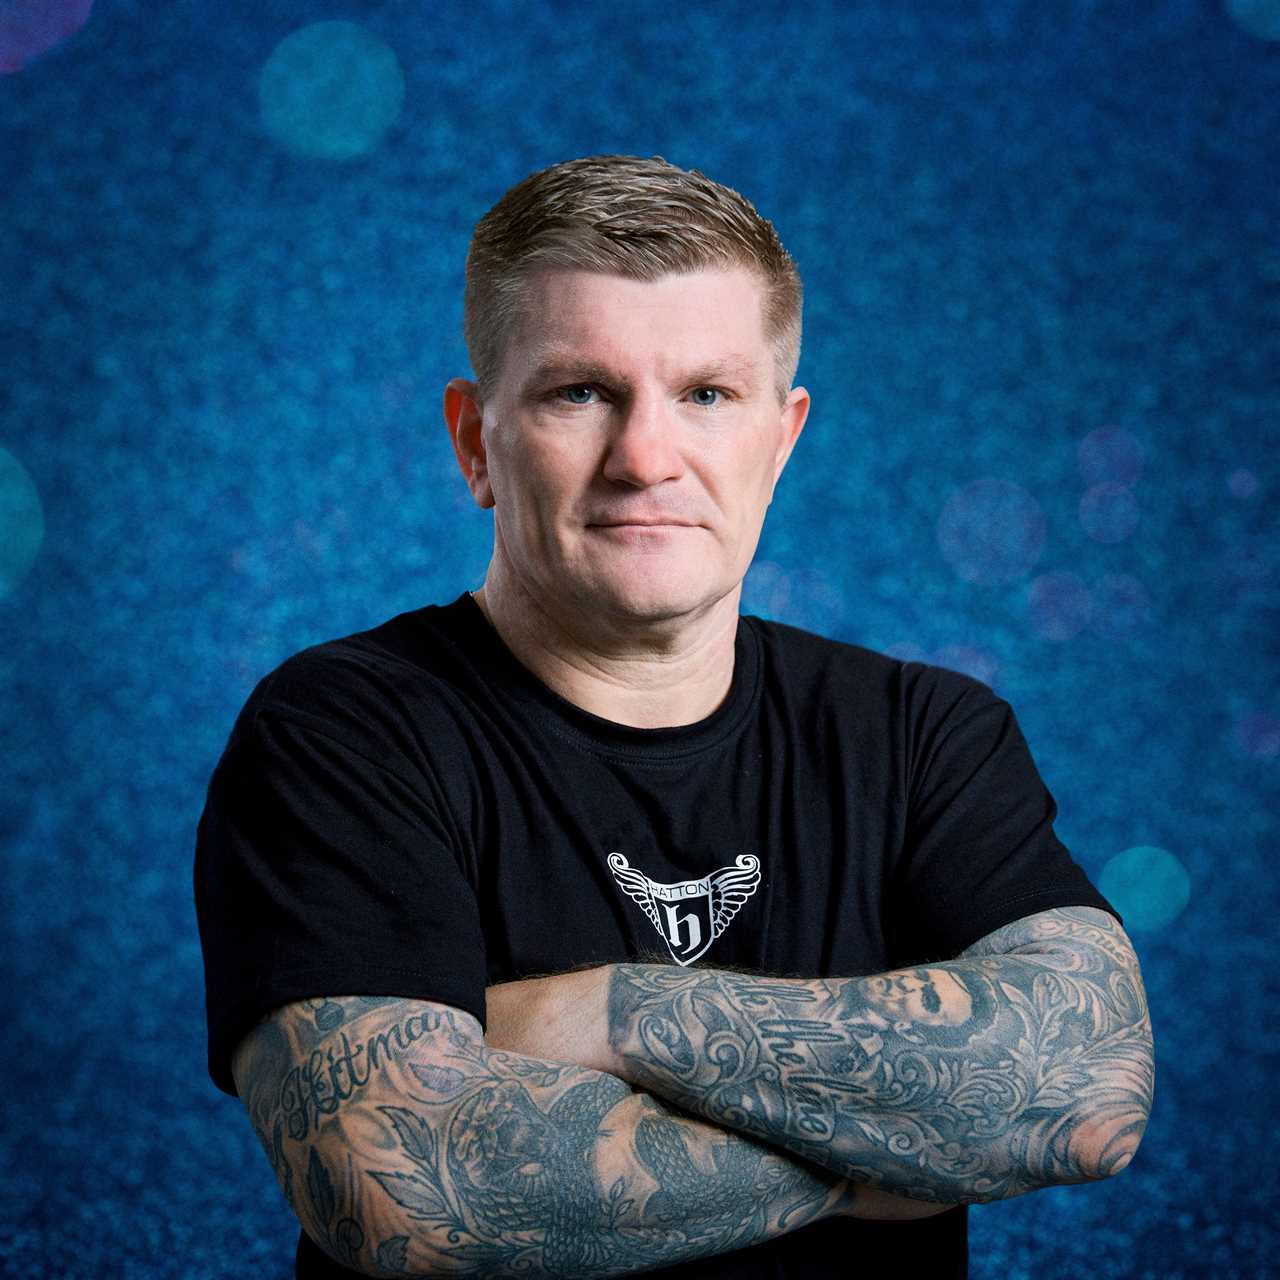 Ricky Hatton's Dancing on Ice Journey: Battling Demons and Finding Purpose